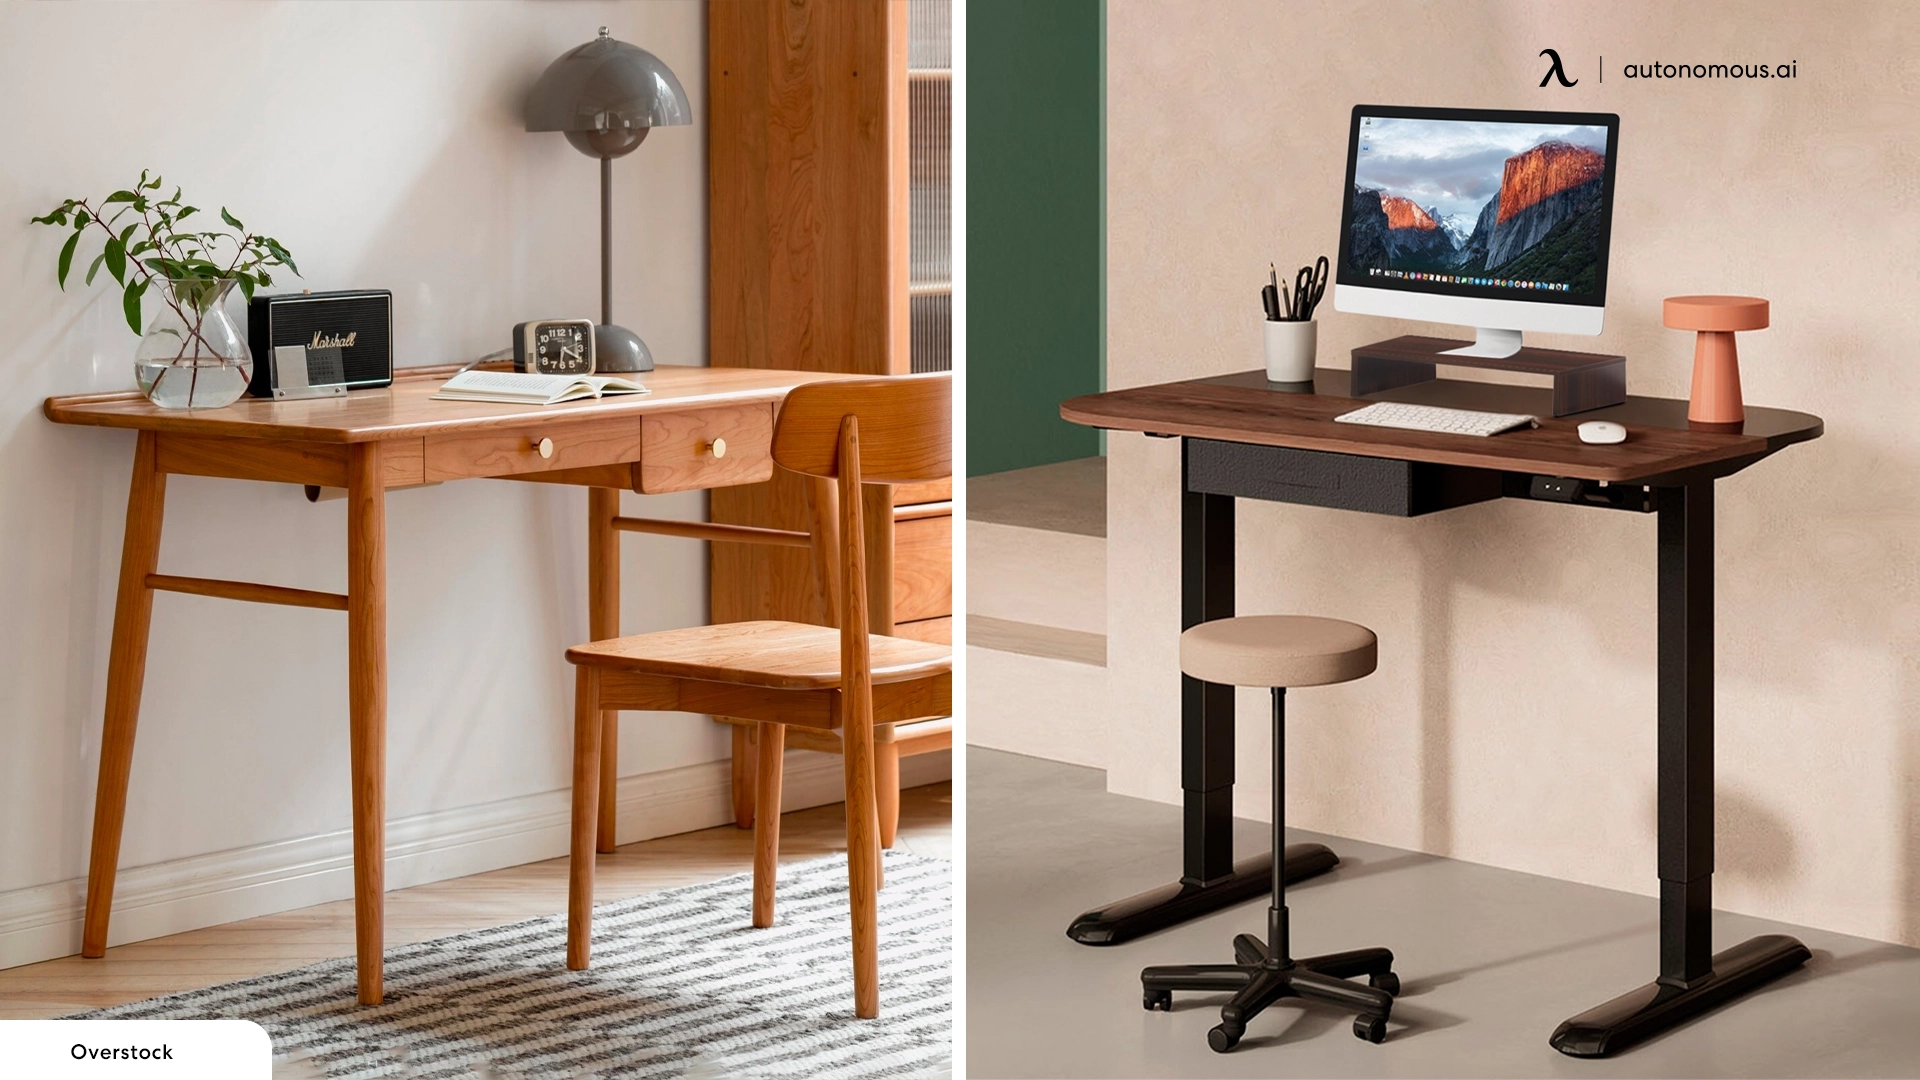 Are Solid Wood Desks More Expensive than Engineered Wood Ones